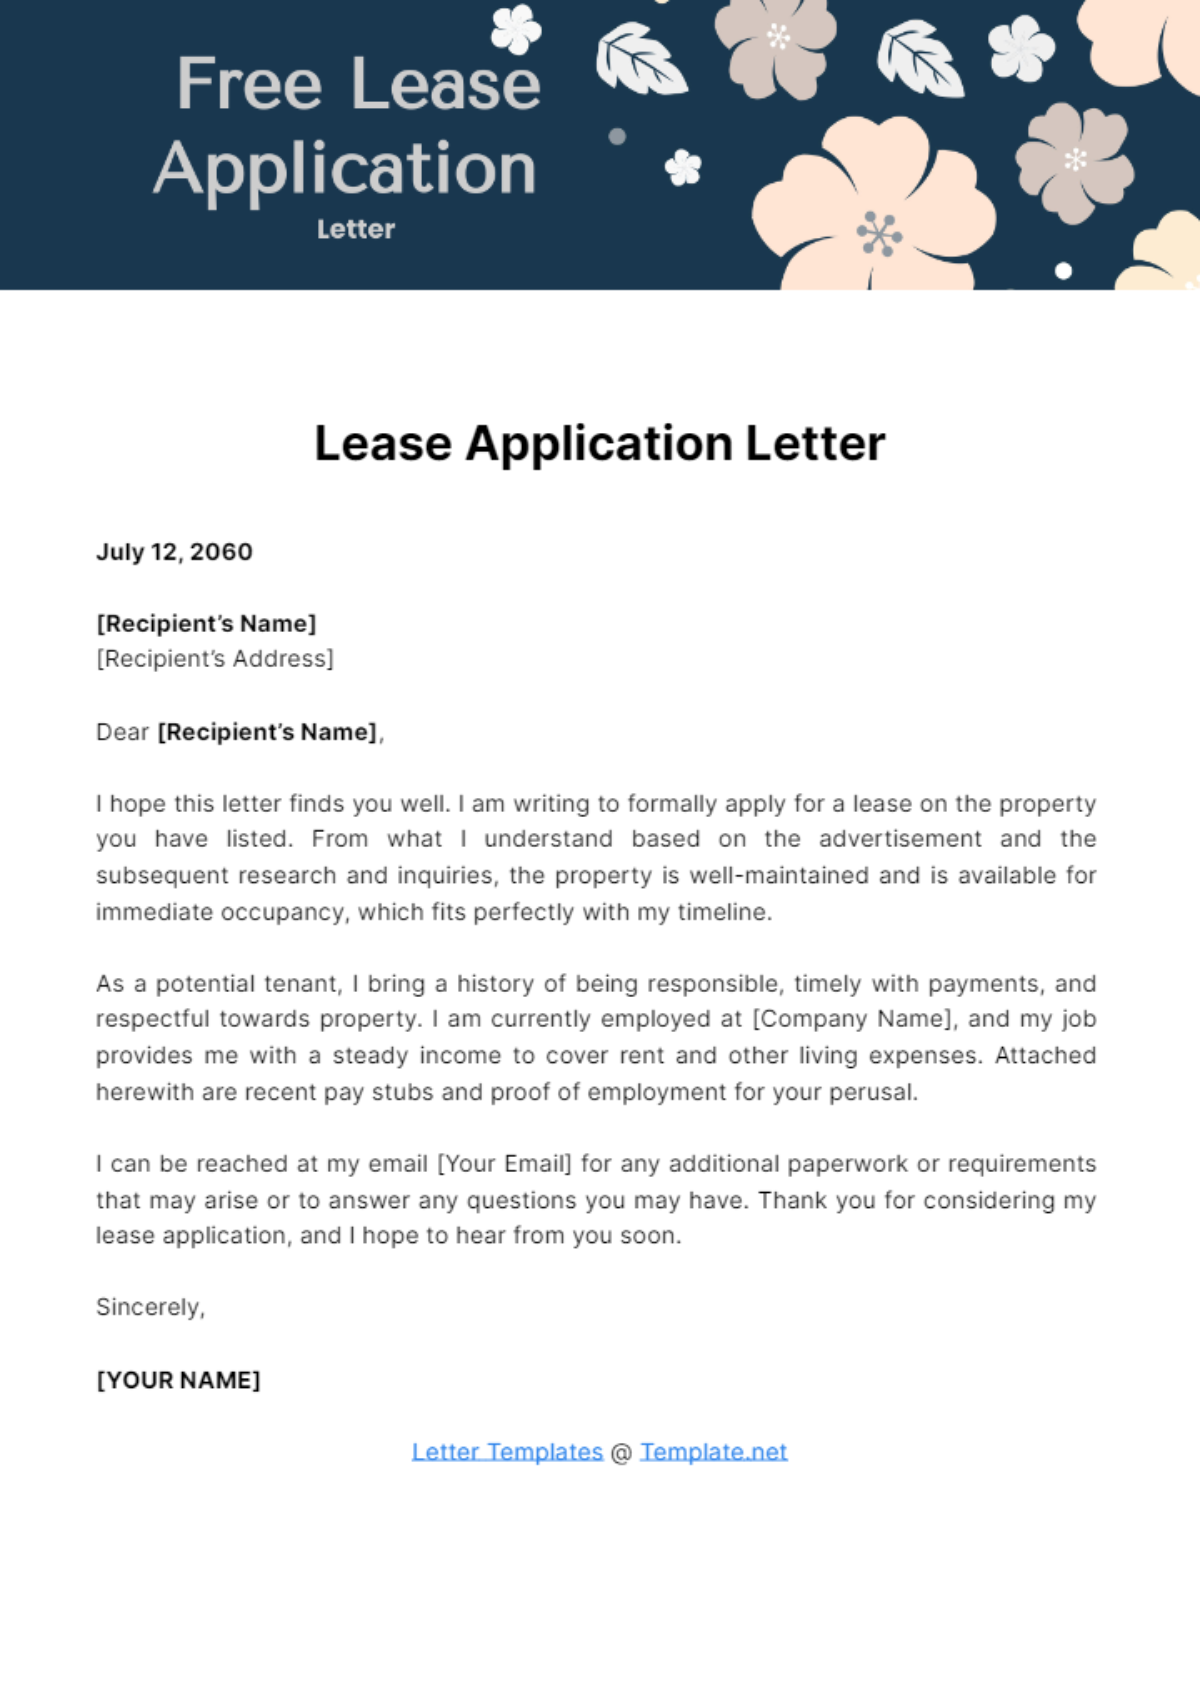 Lease Application Letter Template